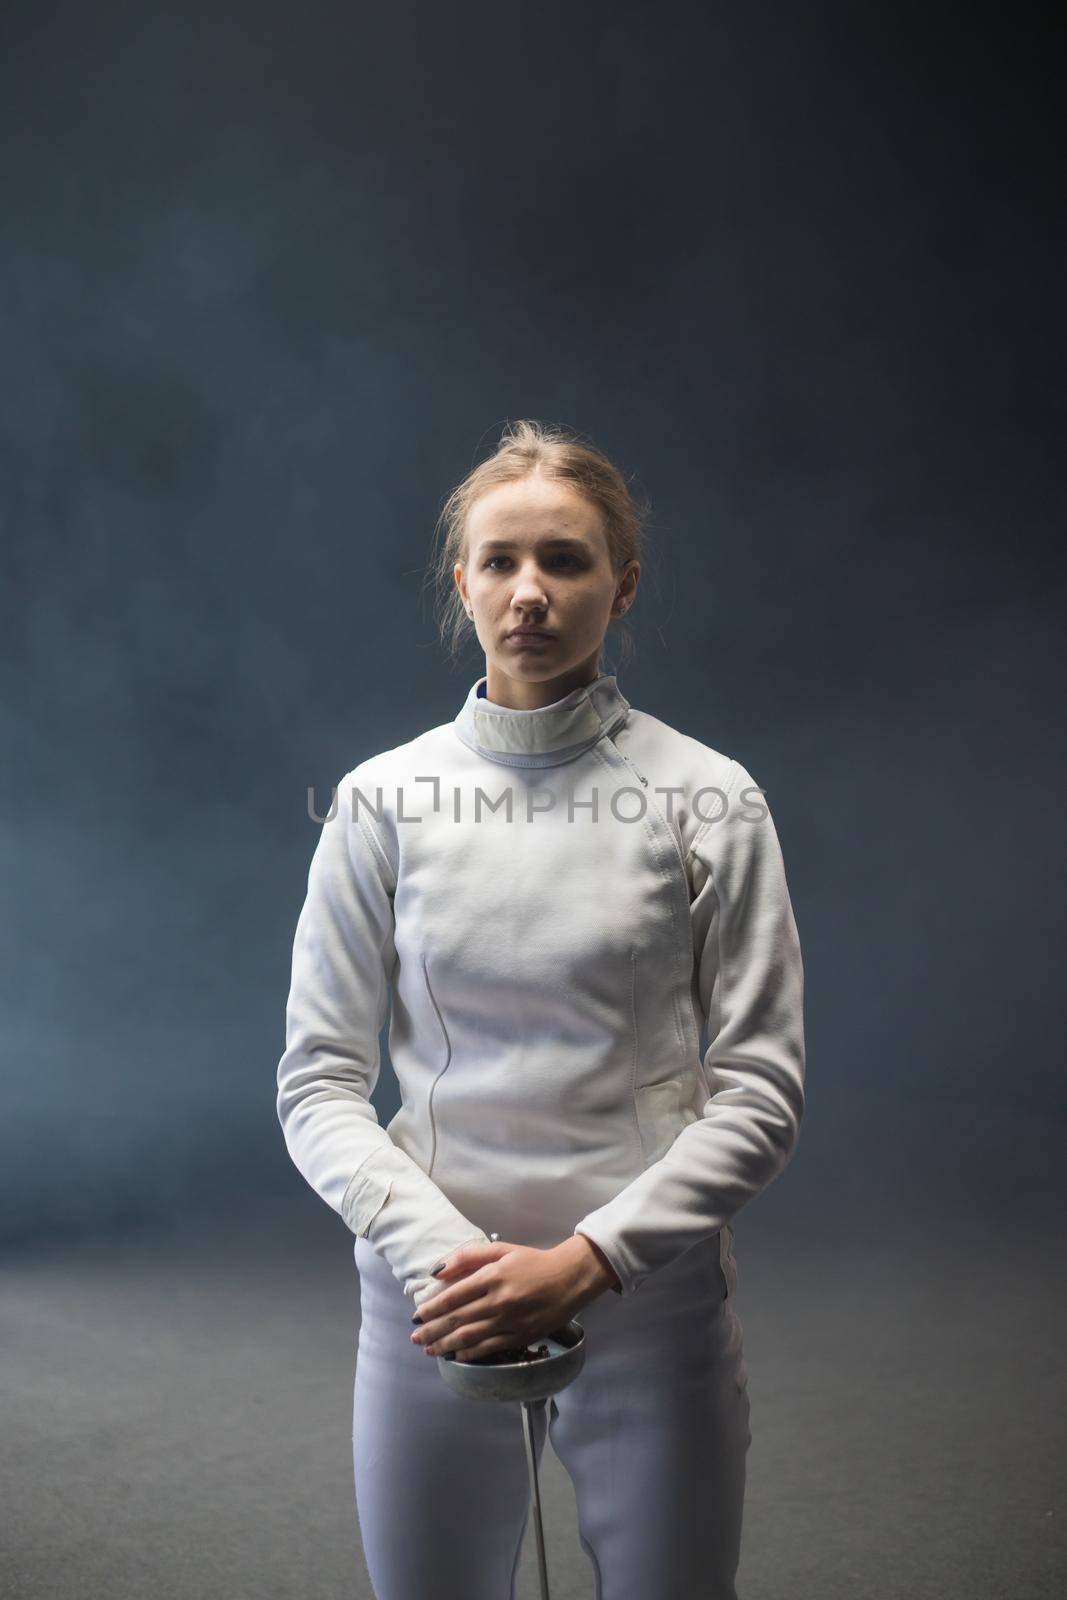 A young woman fencer with her hair in a bun standing with a sword down. Mid shot